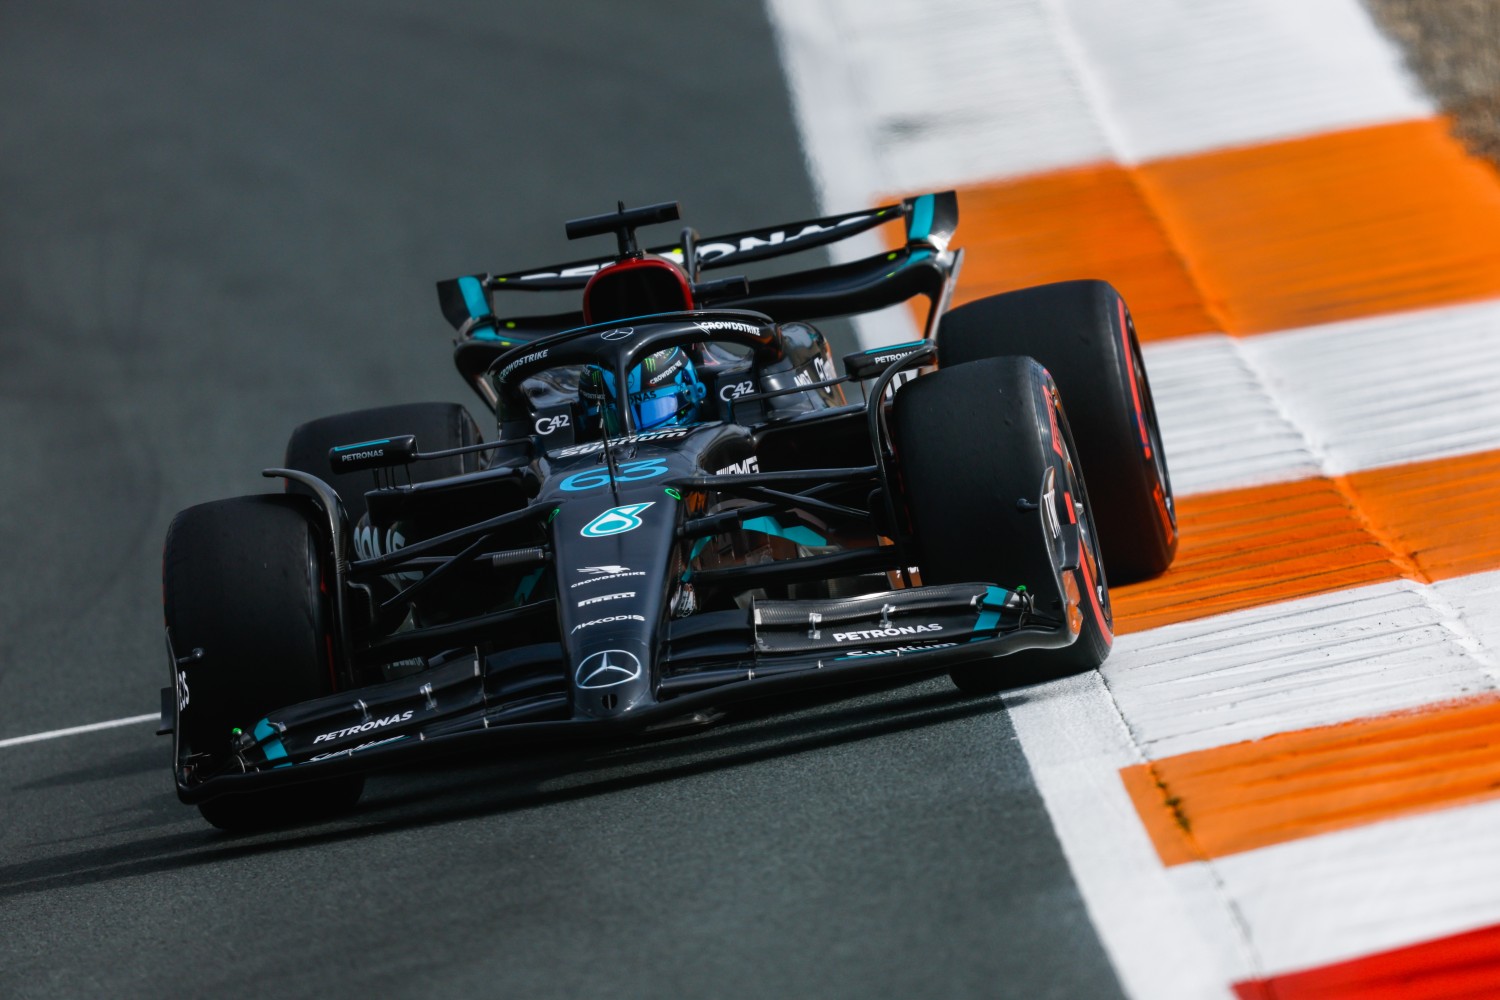 George Russell, Mercedes F1 W14 during the Dutch GP at Circuit Zandvoort on Friday August 25, 2023 in North Holland, Netherlands. (Photo by Zak Mauger / LAT Images)